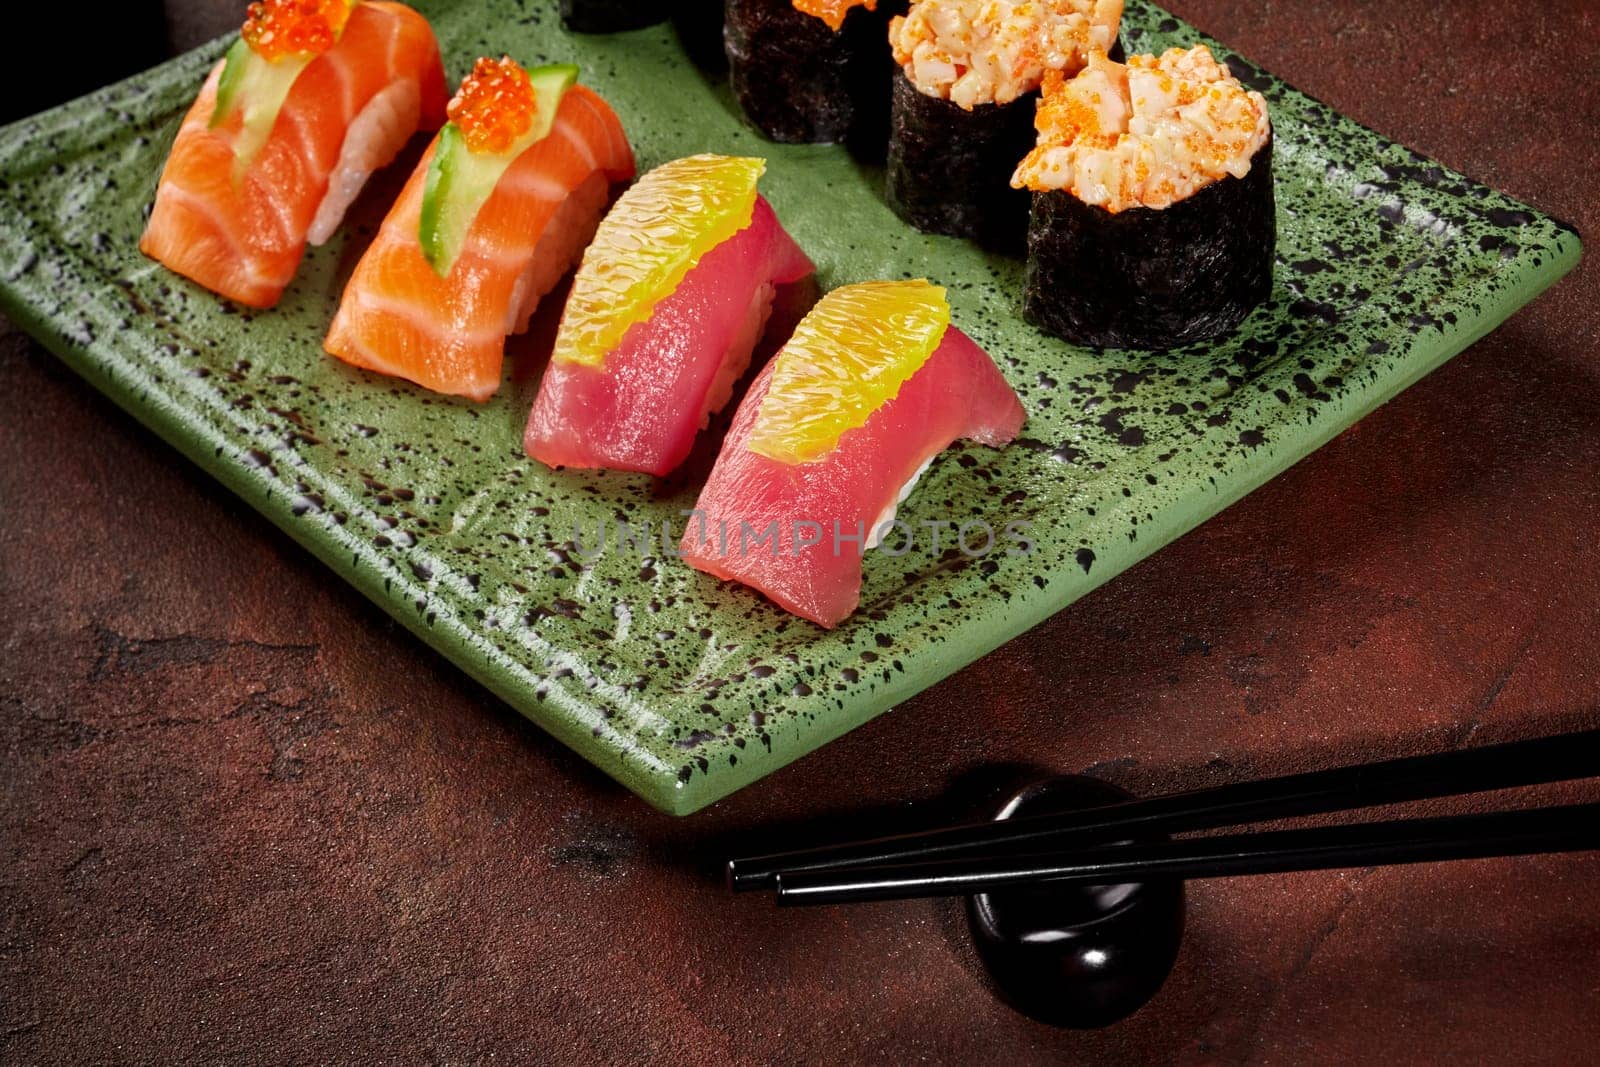 Vibrant sushi set of hand-tossed nigiri with tuna and salmon garnished with orange, cucumber and caviar, and gunkan maki with creamy fish and roe filling on mottled green ceramic plate with chopsticks